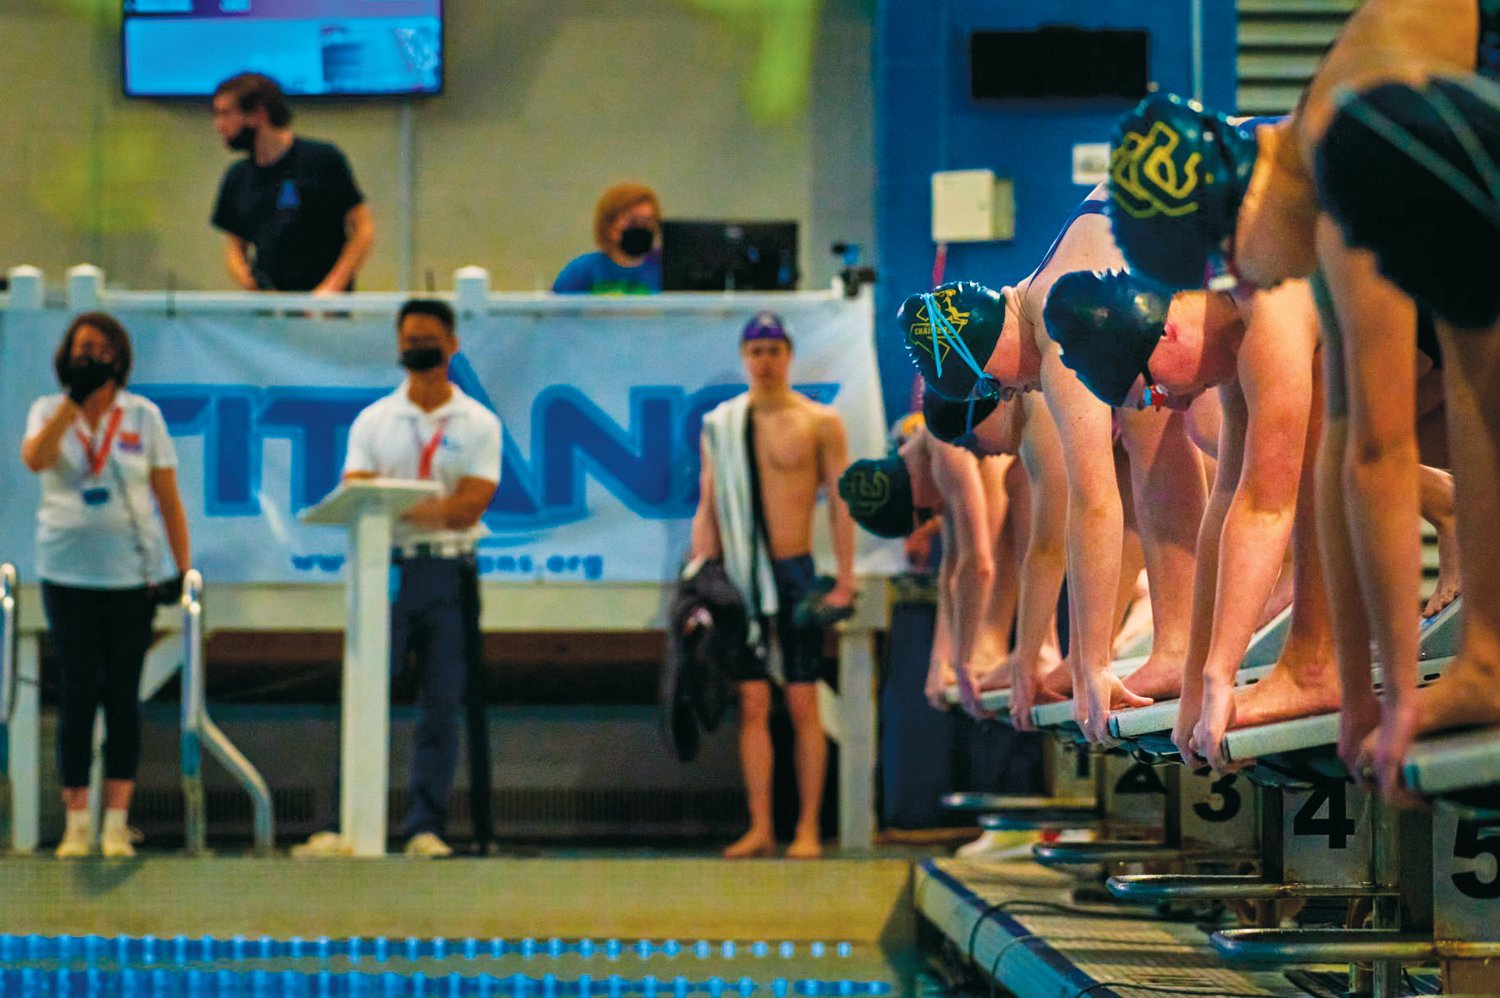 Northwood freshman Abby Emrich (center right, in Northwood cap) prepares to dive into the pool during the women's 100-yard butterfly at the NCHSAA 3A Swimming State Championships at Triangle Aquatic Center last Friday. Emrich placed 5th in the championship final with a time of 59.57.